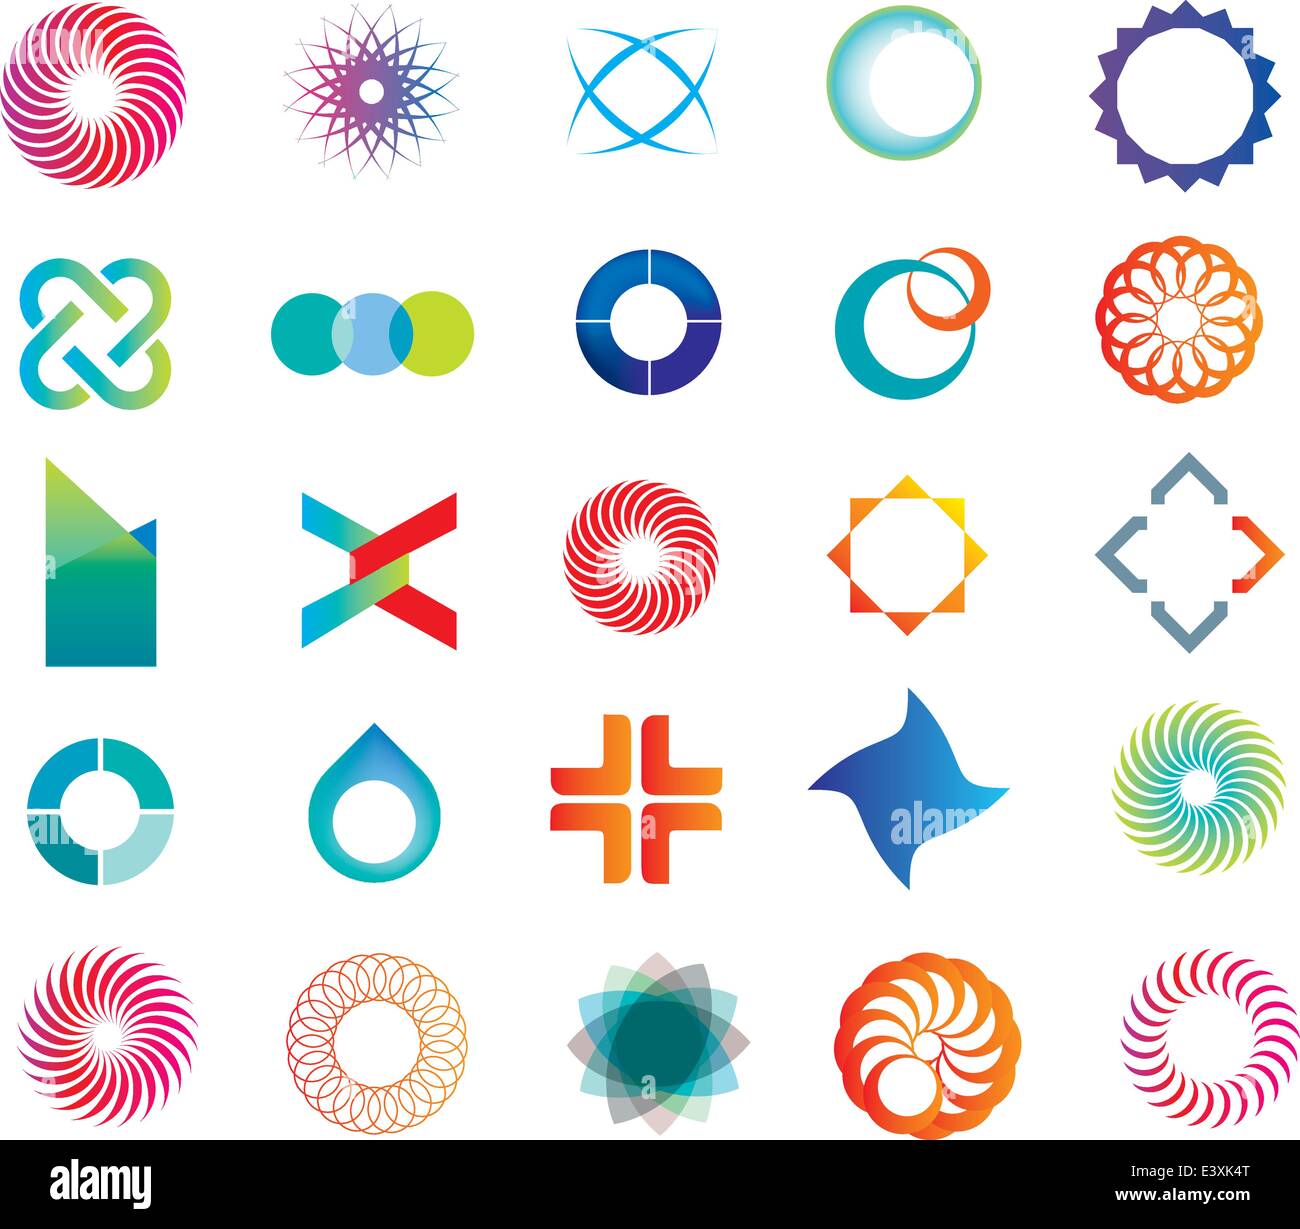 set of corporate logos symbols and marks Stock Vector